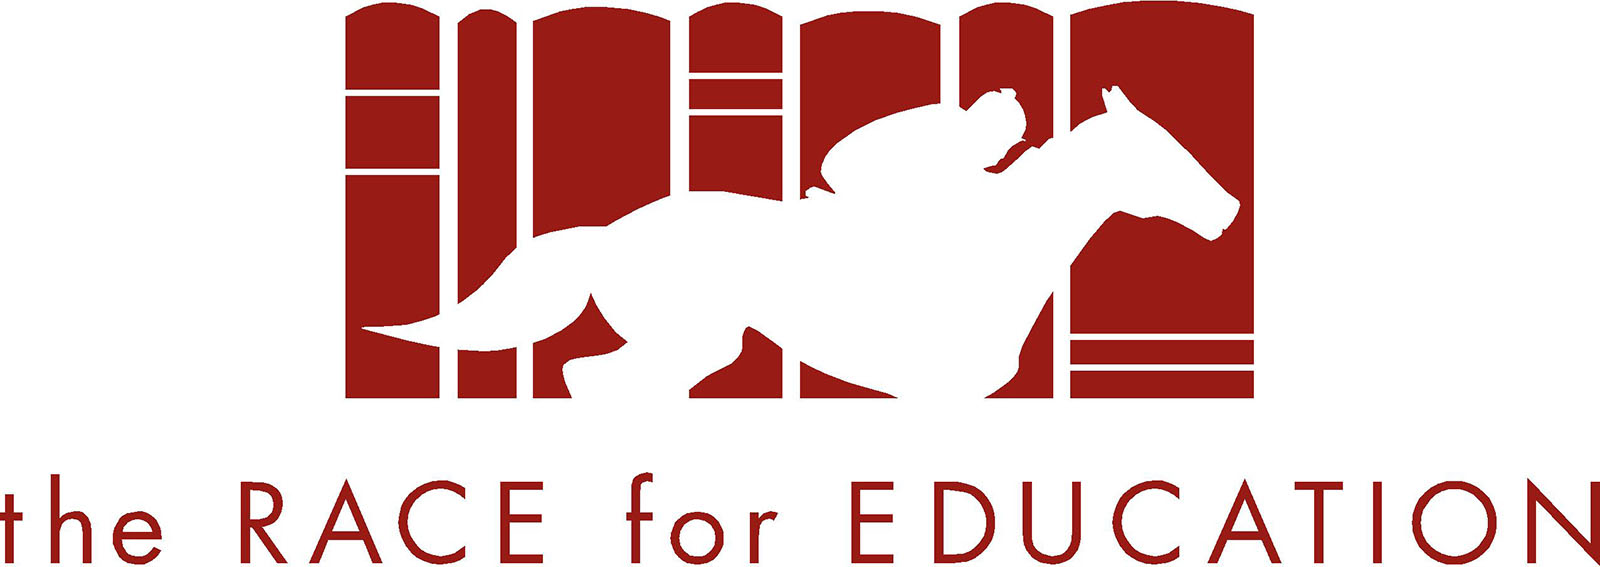 Race for Education